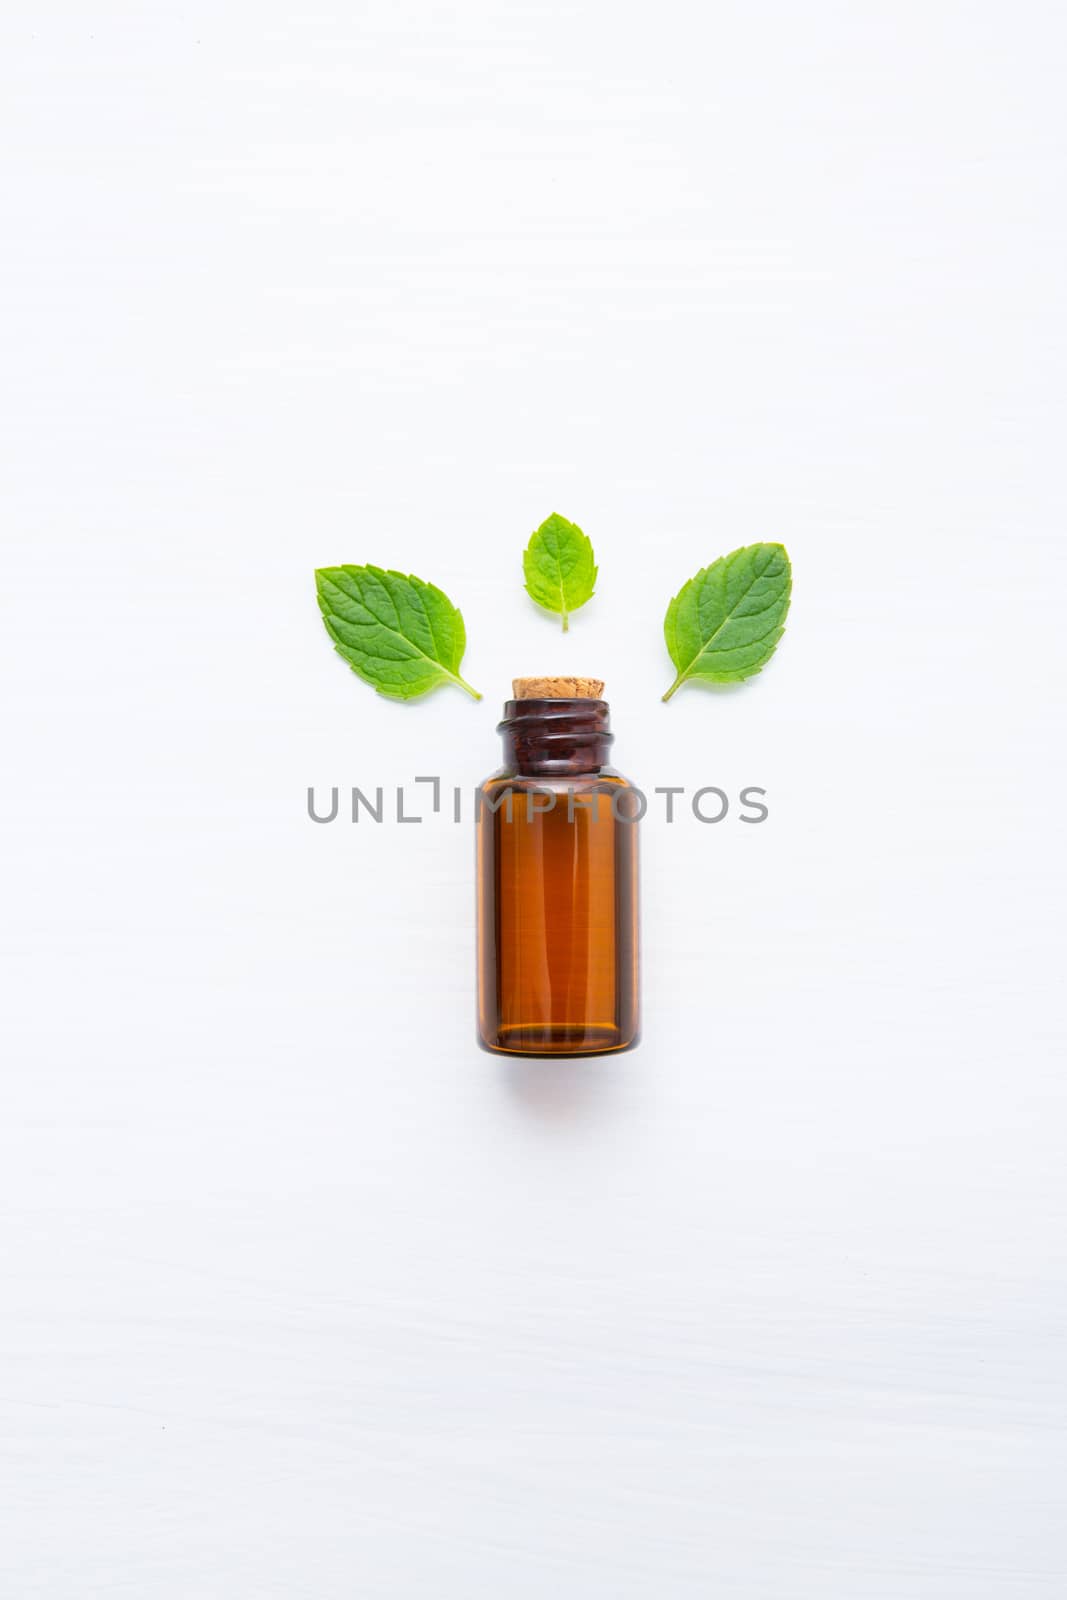 Natural Mint Essential Oil in a Glass Bottle with Fresh Mint Lea by Bowonpat